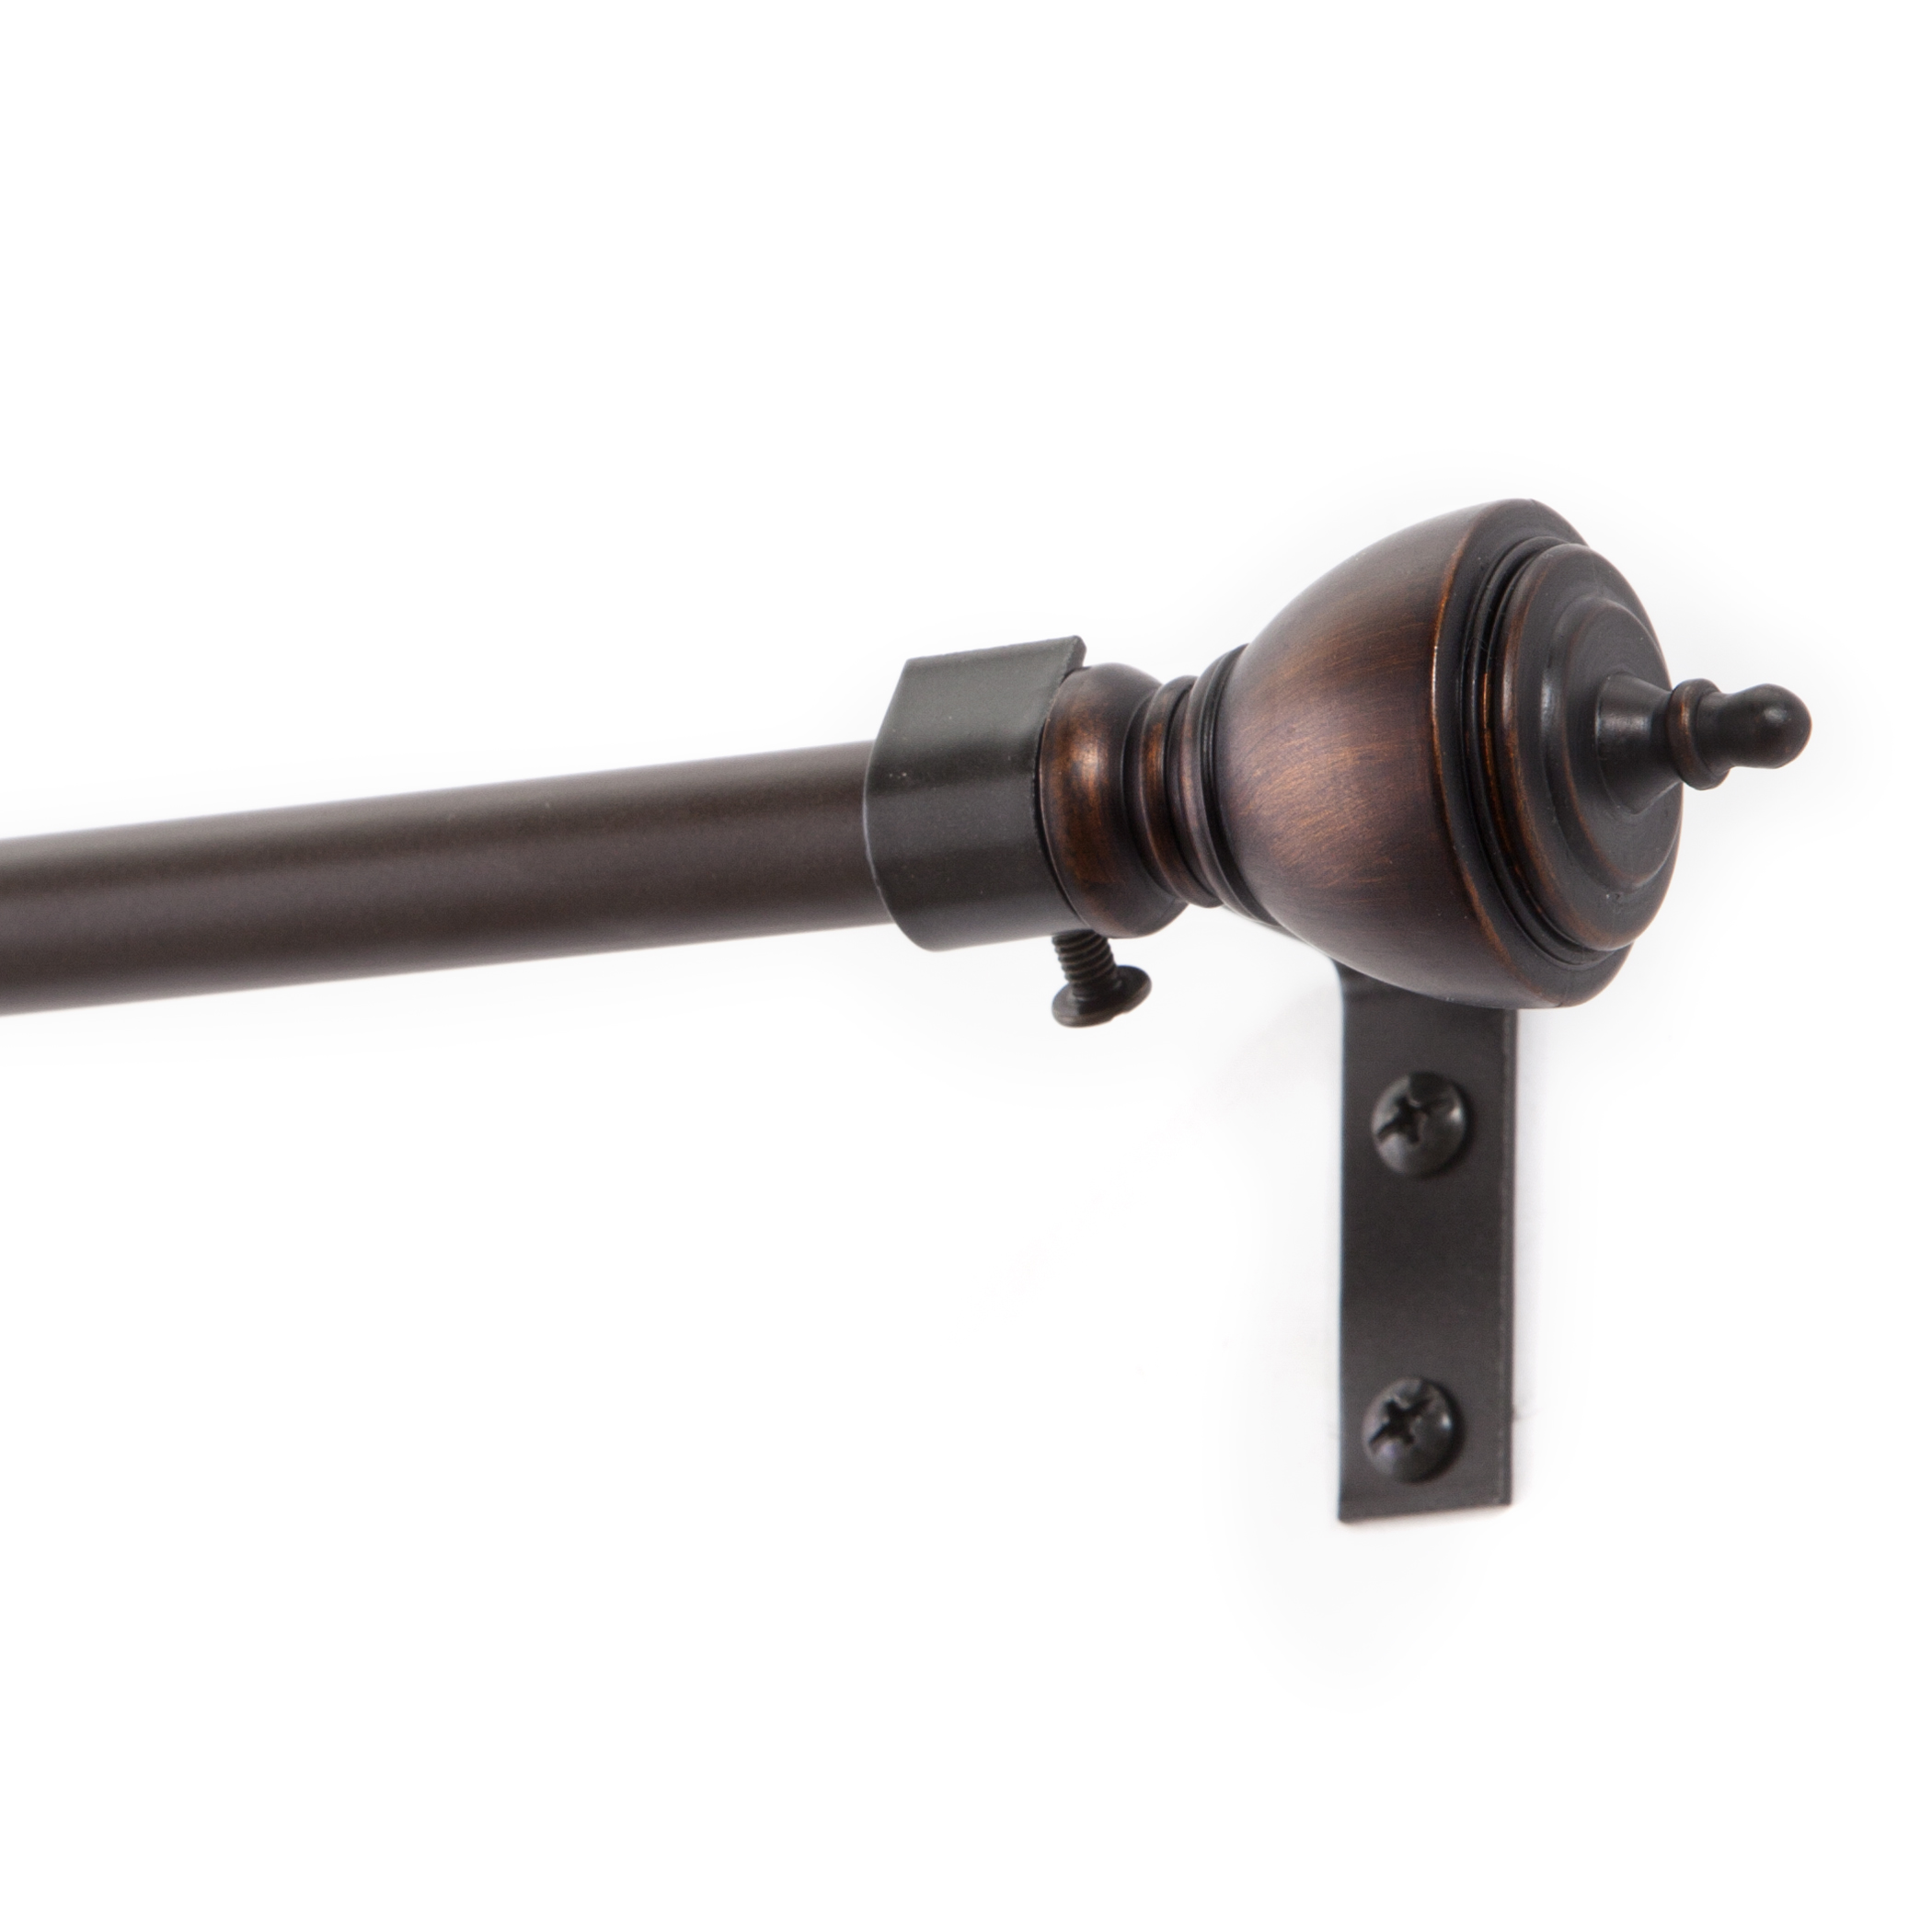 Kenney Butler 1/2" Petite Cafe Decorative Window Curtain Rod, 28-48", Aged Copper - image 5 of 8